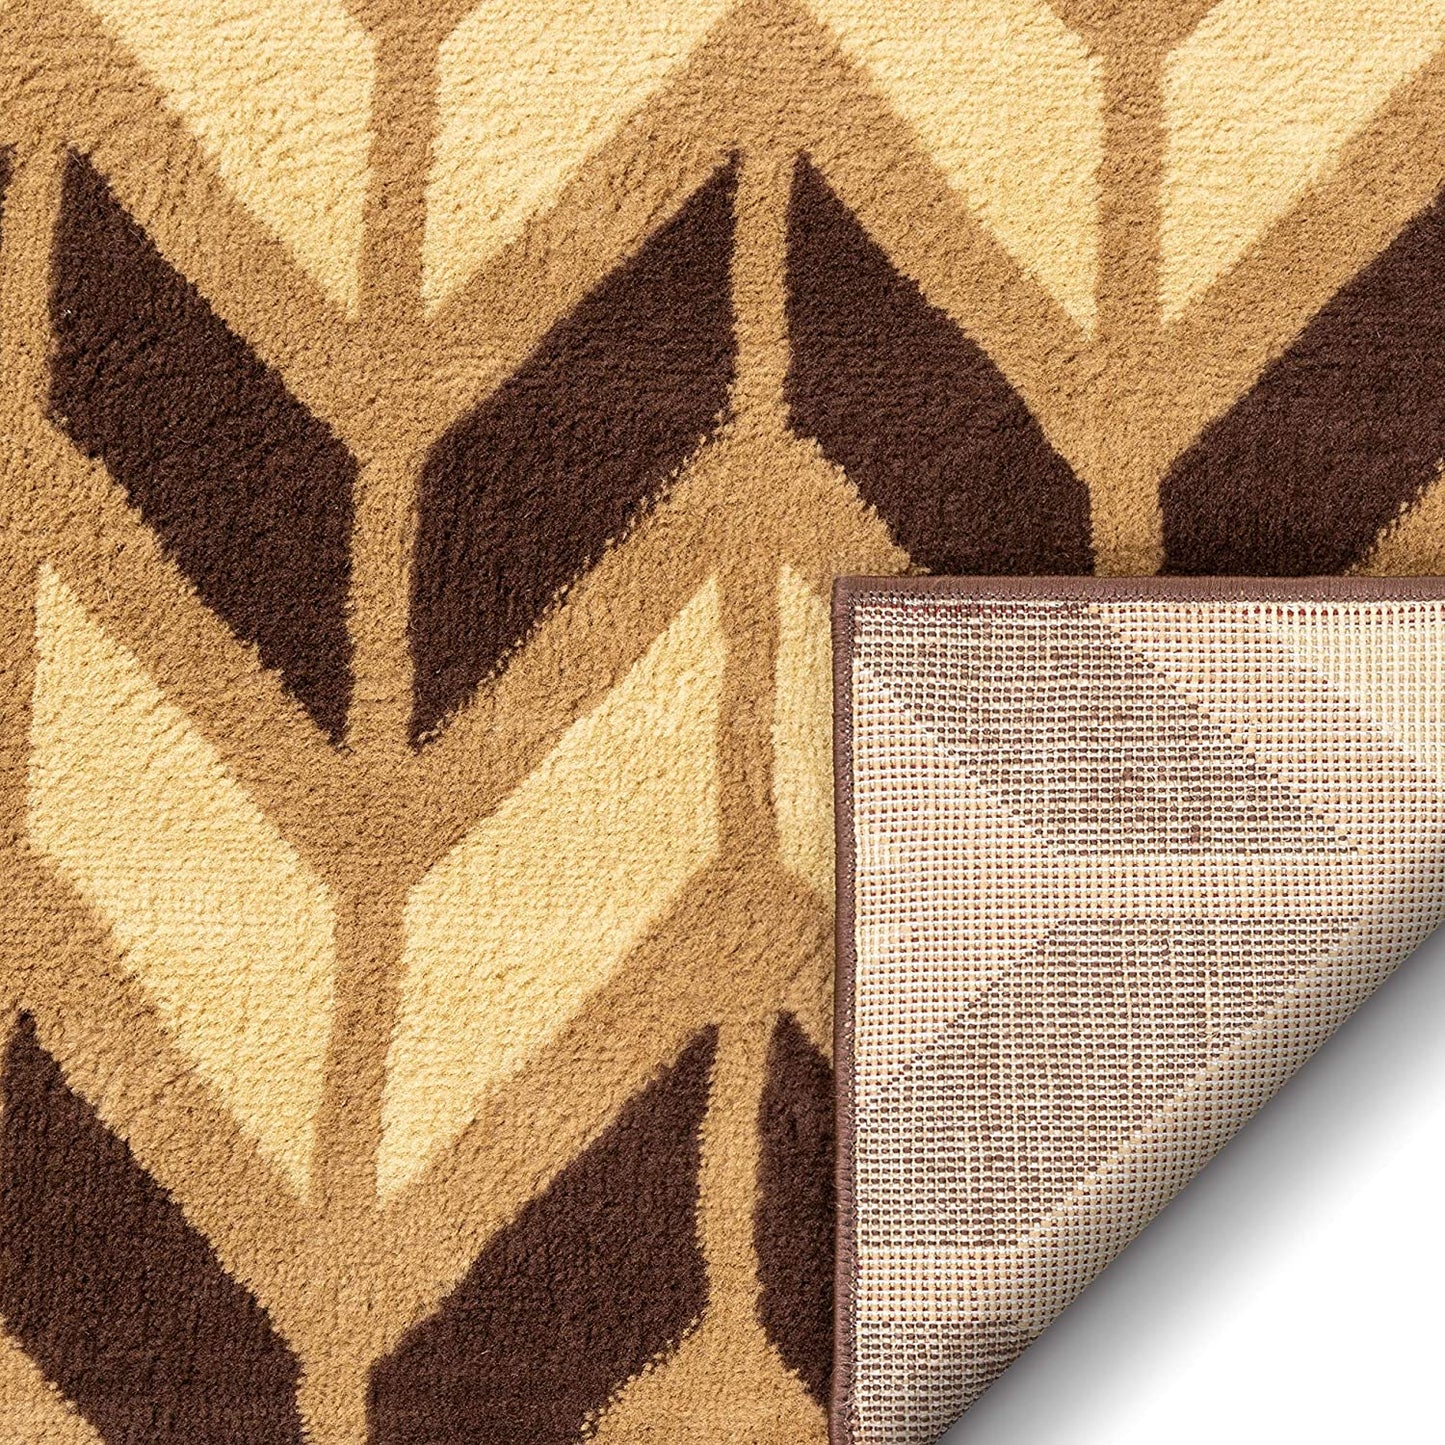 Chevron Beige and Brown  Area Rug Carpet